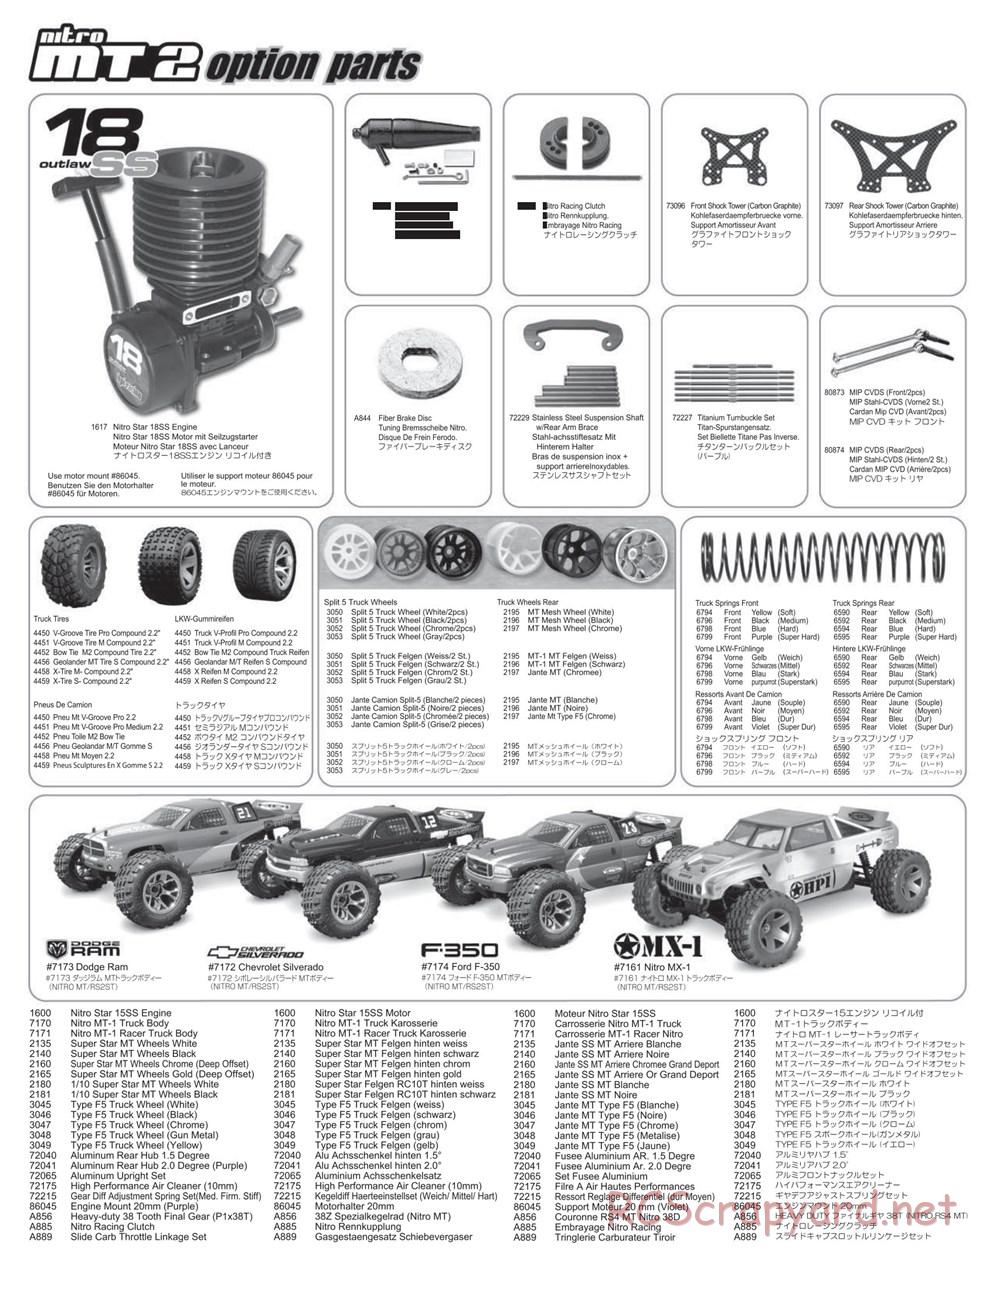 HPI - Nitro MT2 - Exploded View - Page 44